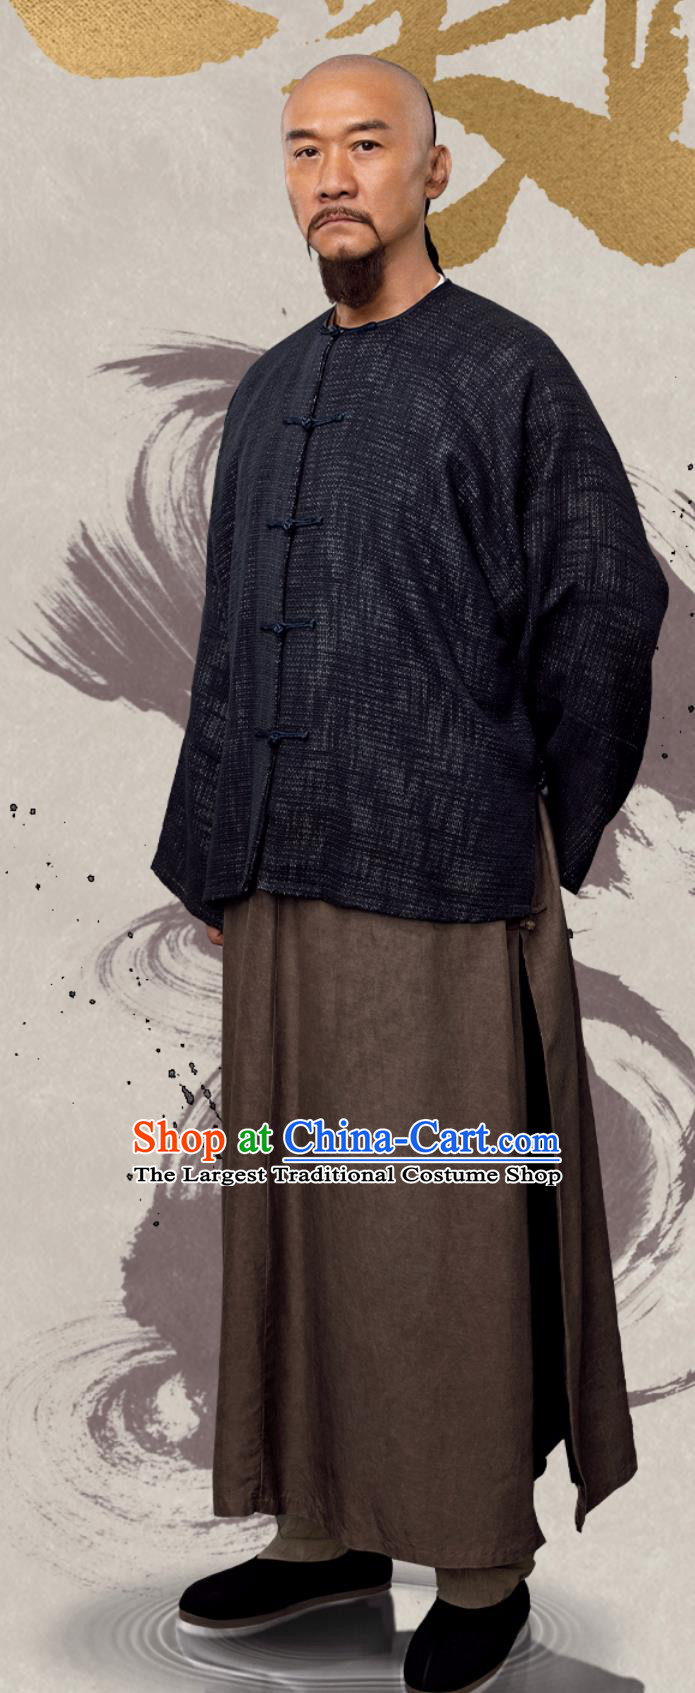 Historical Drama The Long River Military Governor Jin Fu Outfit China Ancient Qing Dynasty Squire Clothing